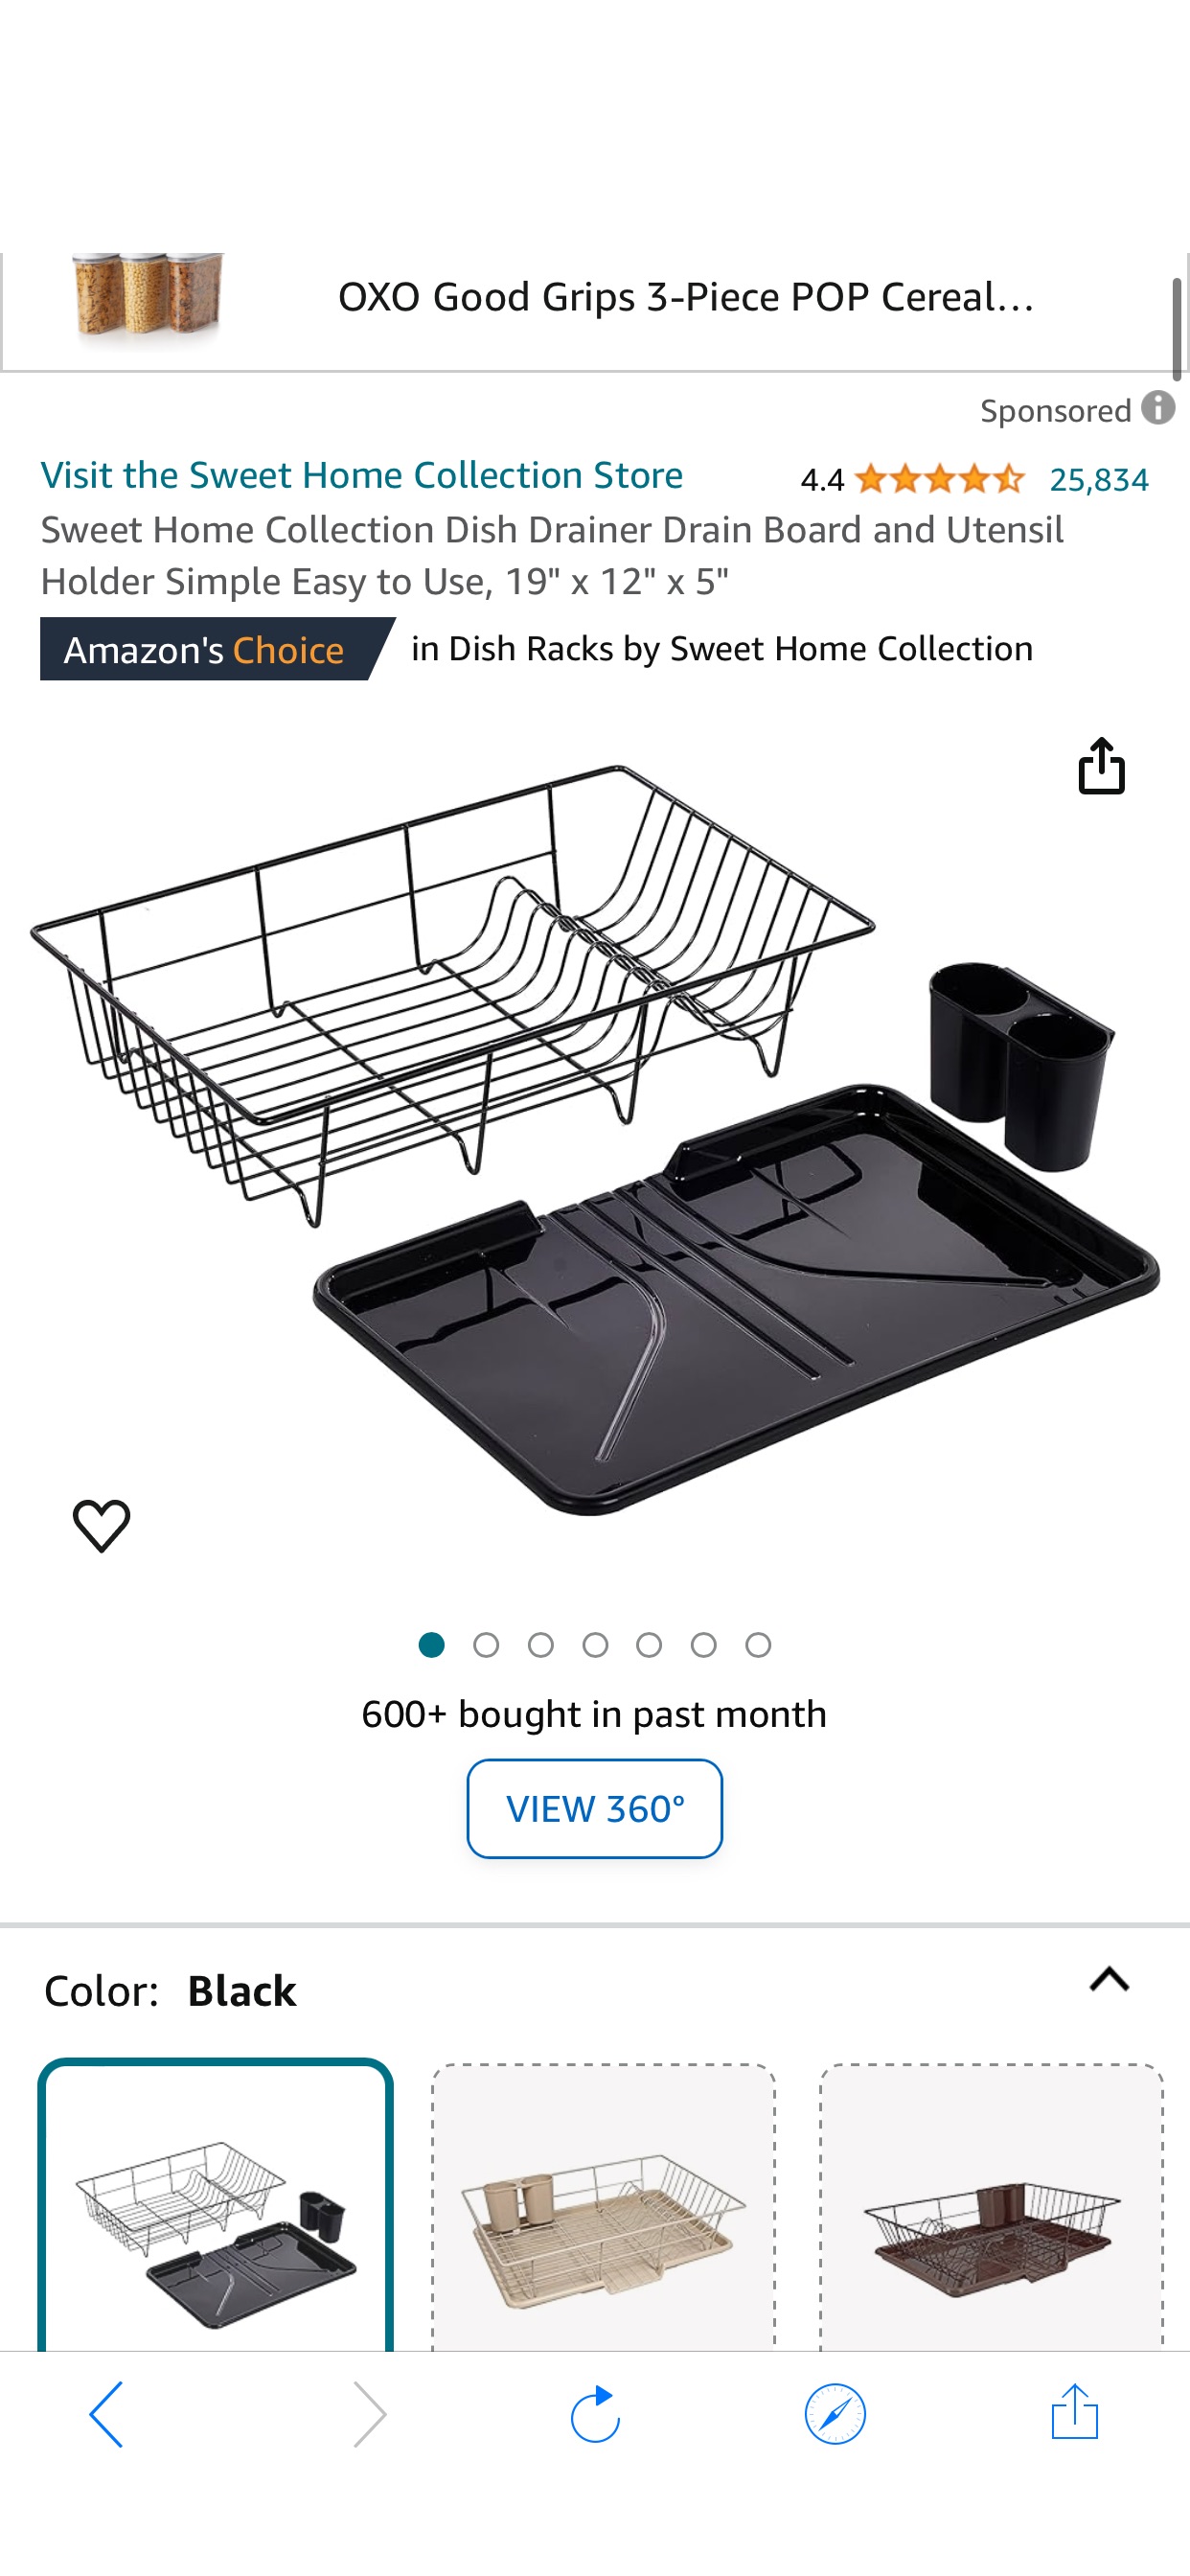 Amazon.com: Sweet Home Collection Dish Drainer Drain Board and Utensil Holder Simple Easy to Use, 19" x 12" x 5" : Home & Kitchen 沥水架